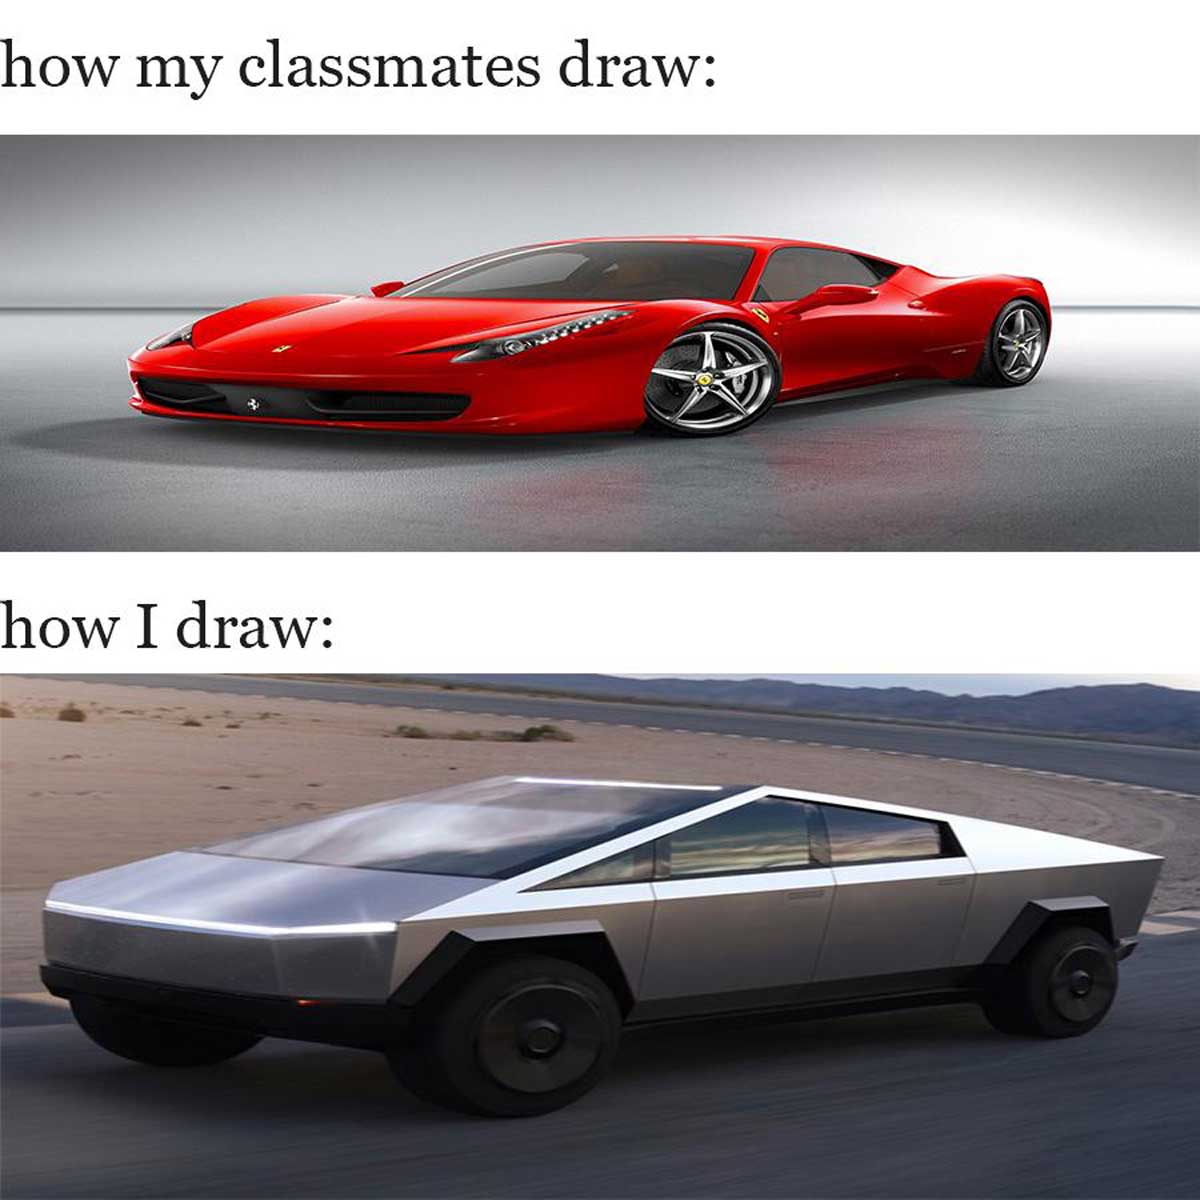 Tesla Cybertruck meme that shows a Ferrari 458 italia with the caption 'how my classmates draw' and a photo of the Tesla Cybertruck with the caption 'how I draw'